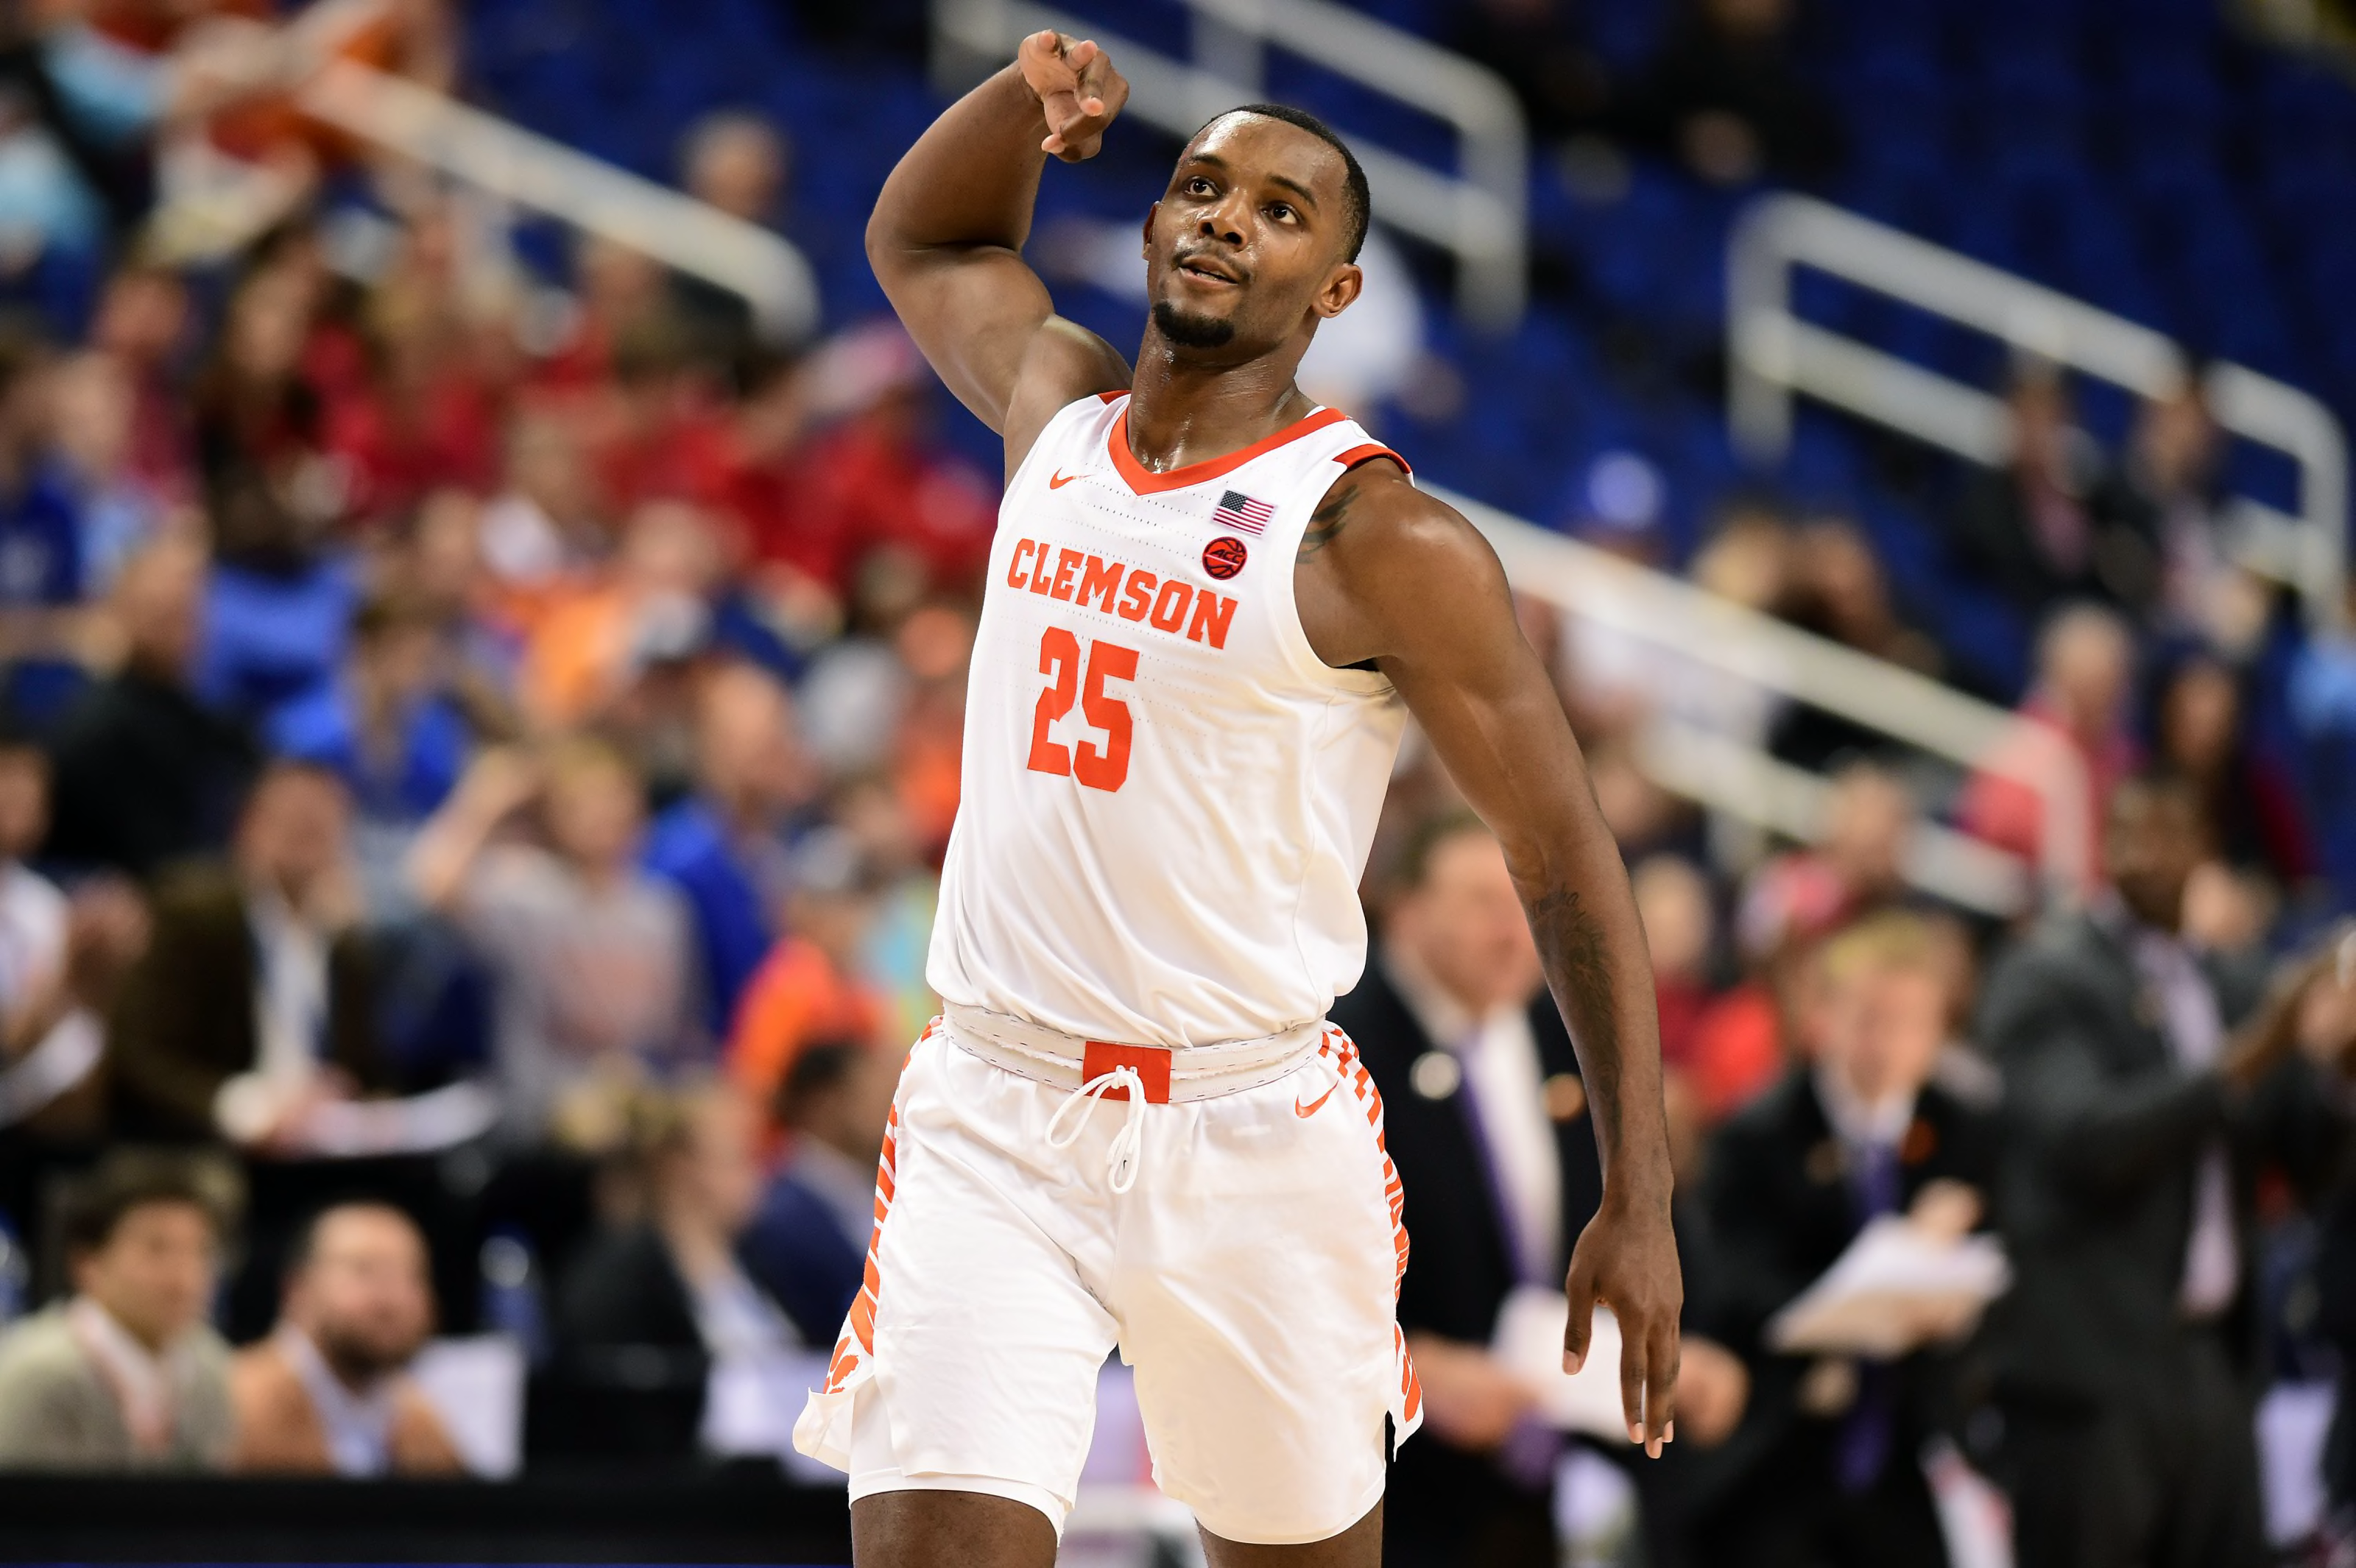 Clemson Basketball 202021 season preview for the Tigers Page 4